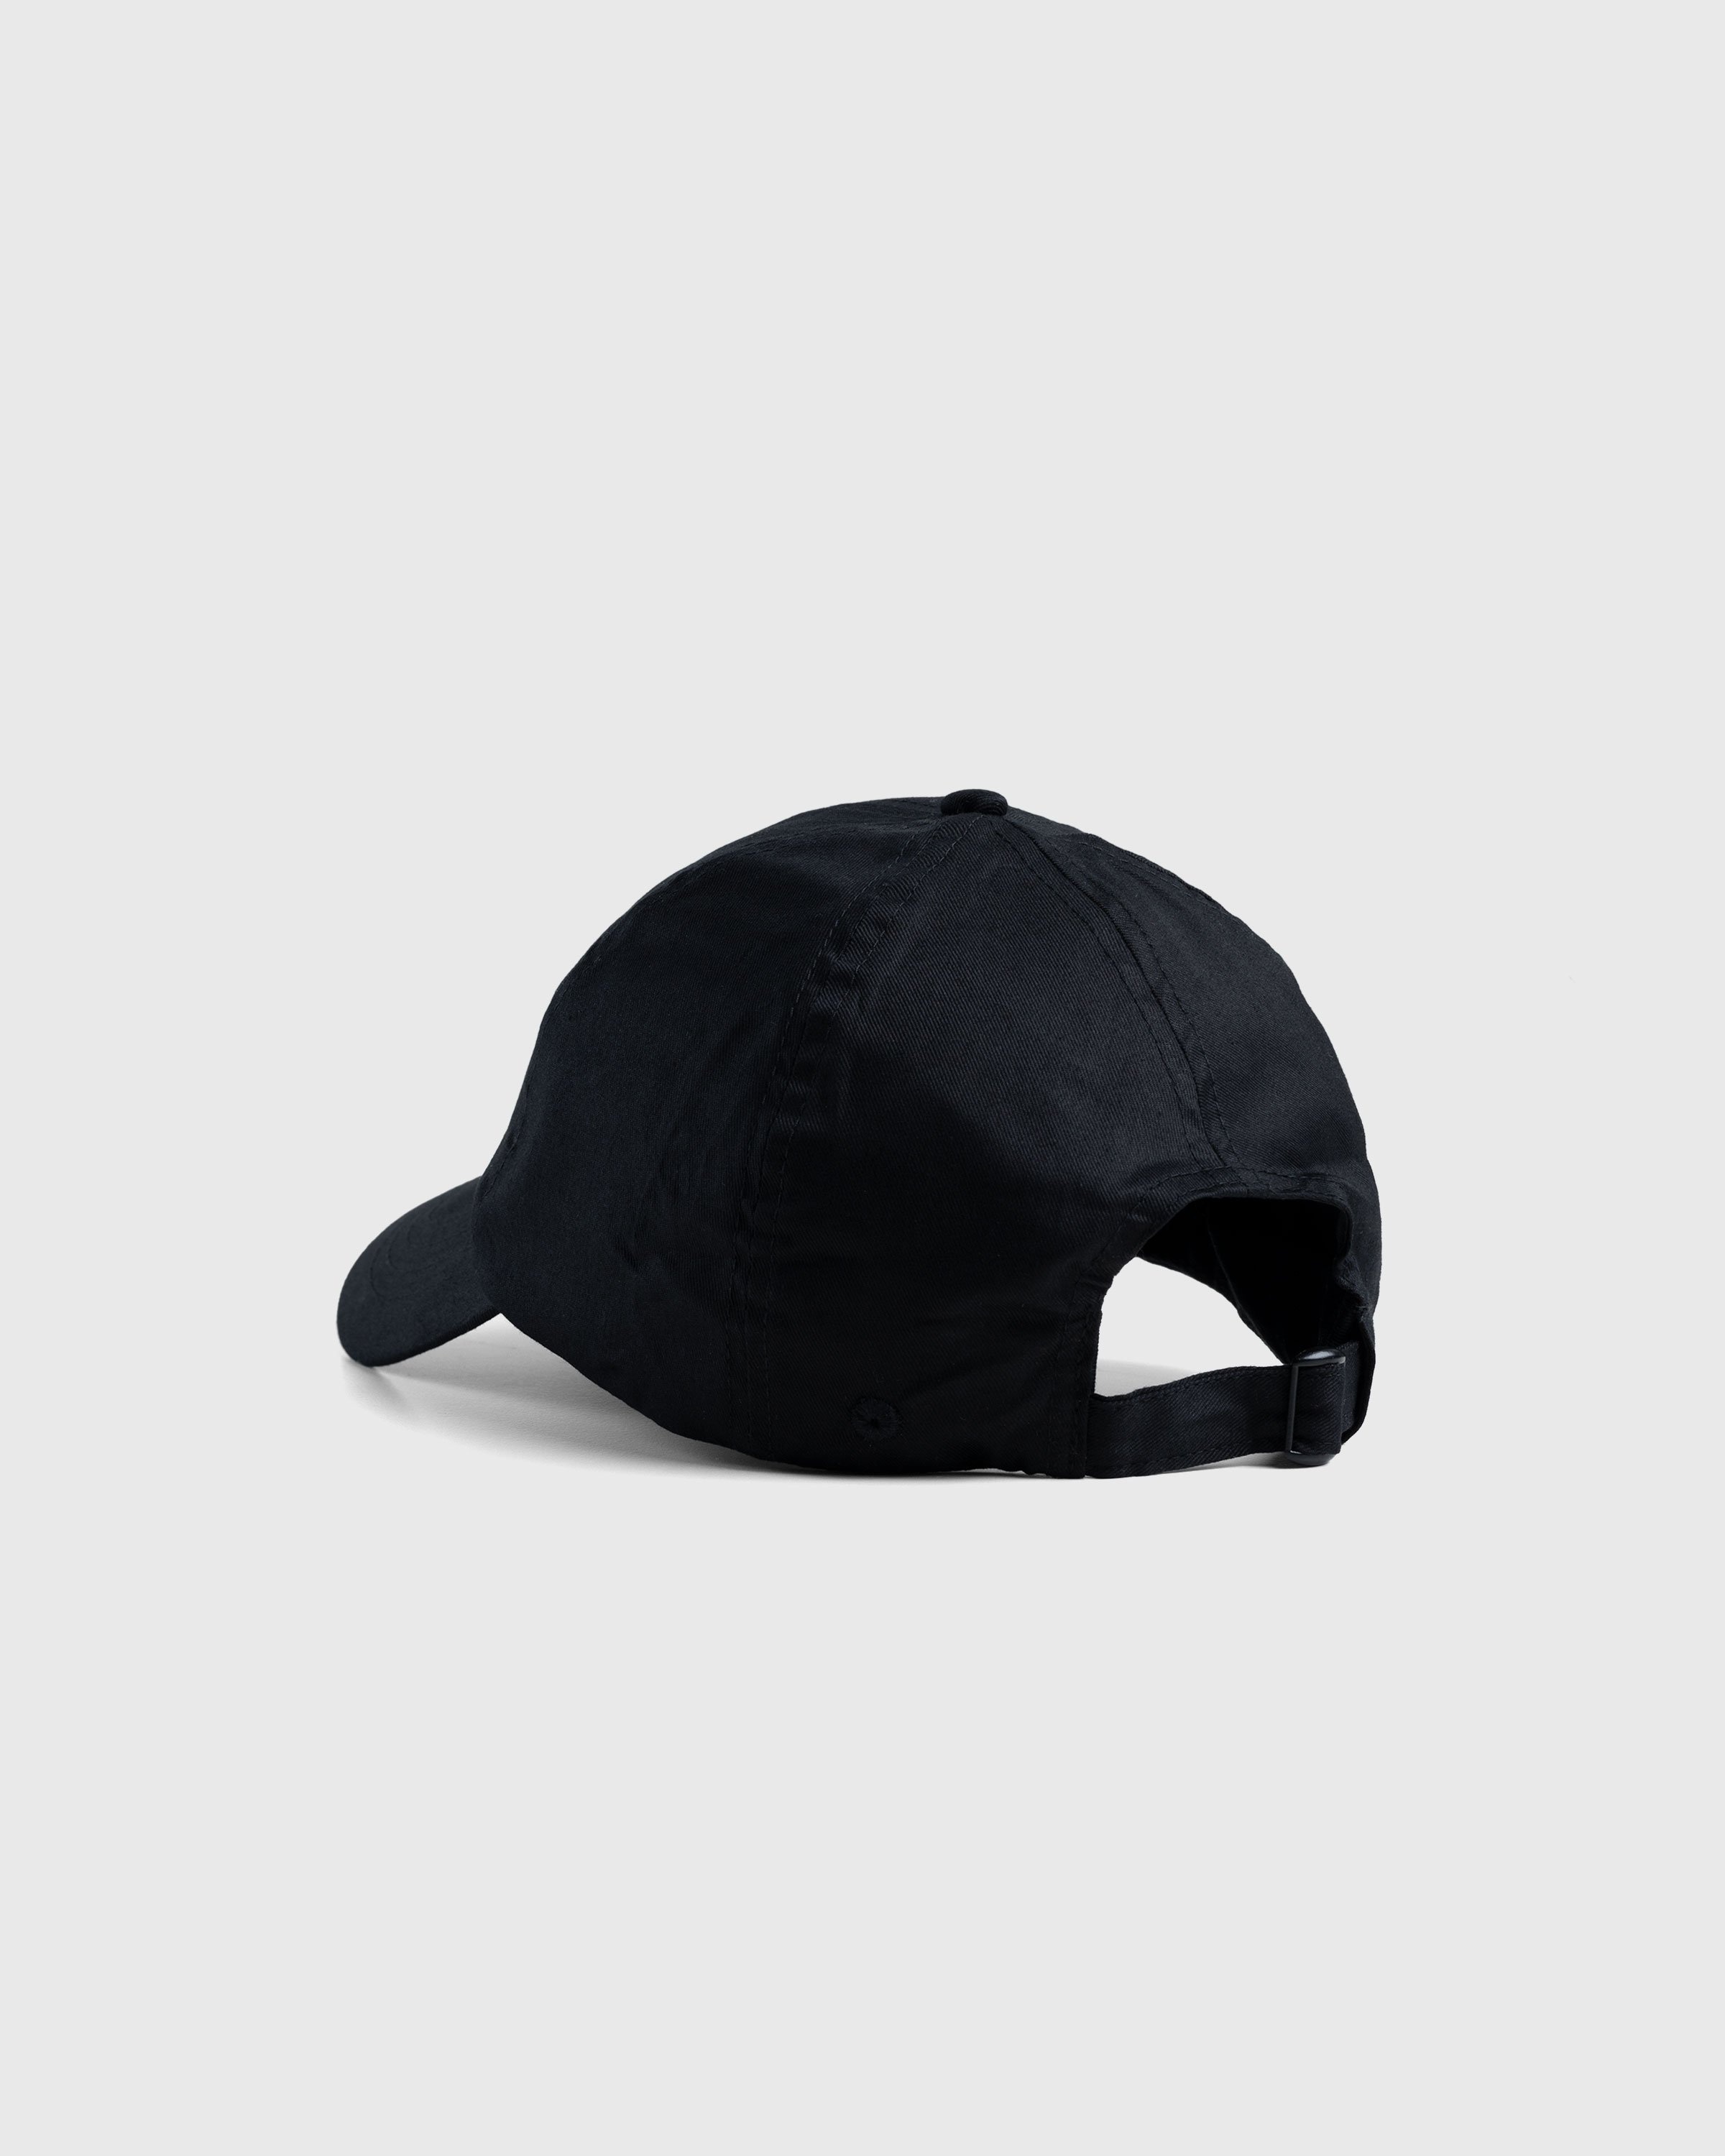 A-Cold-Wall* – Cotton Bracket Cap Black - Hats - here - Image 3